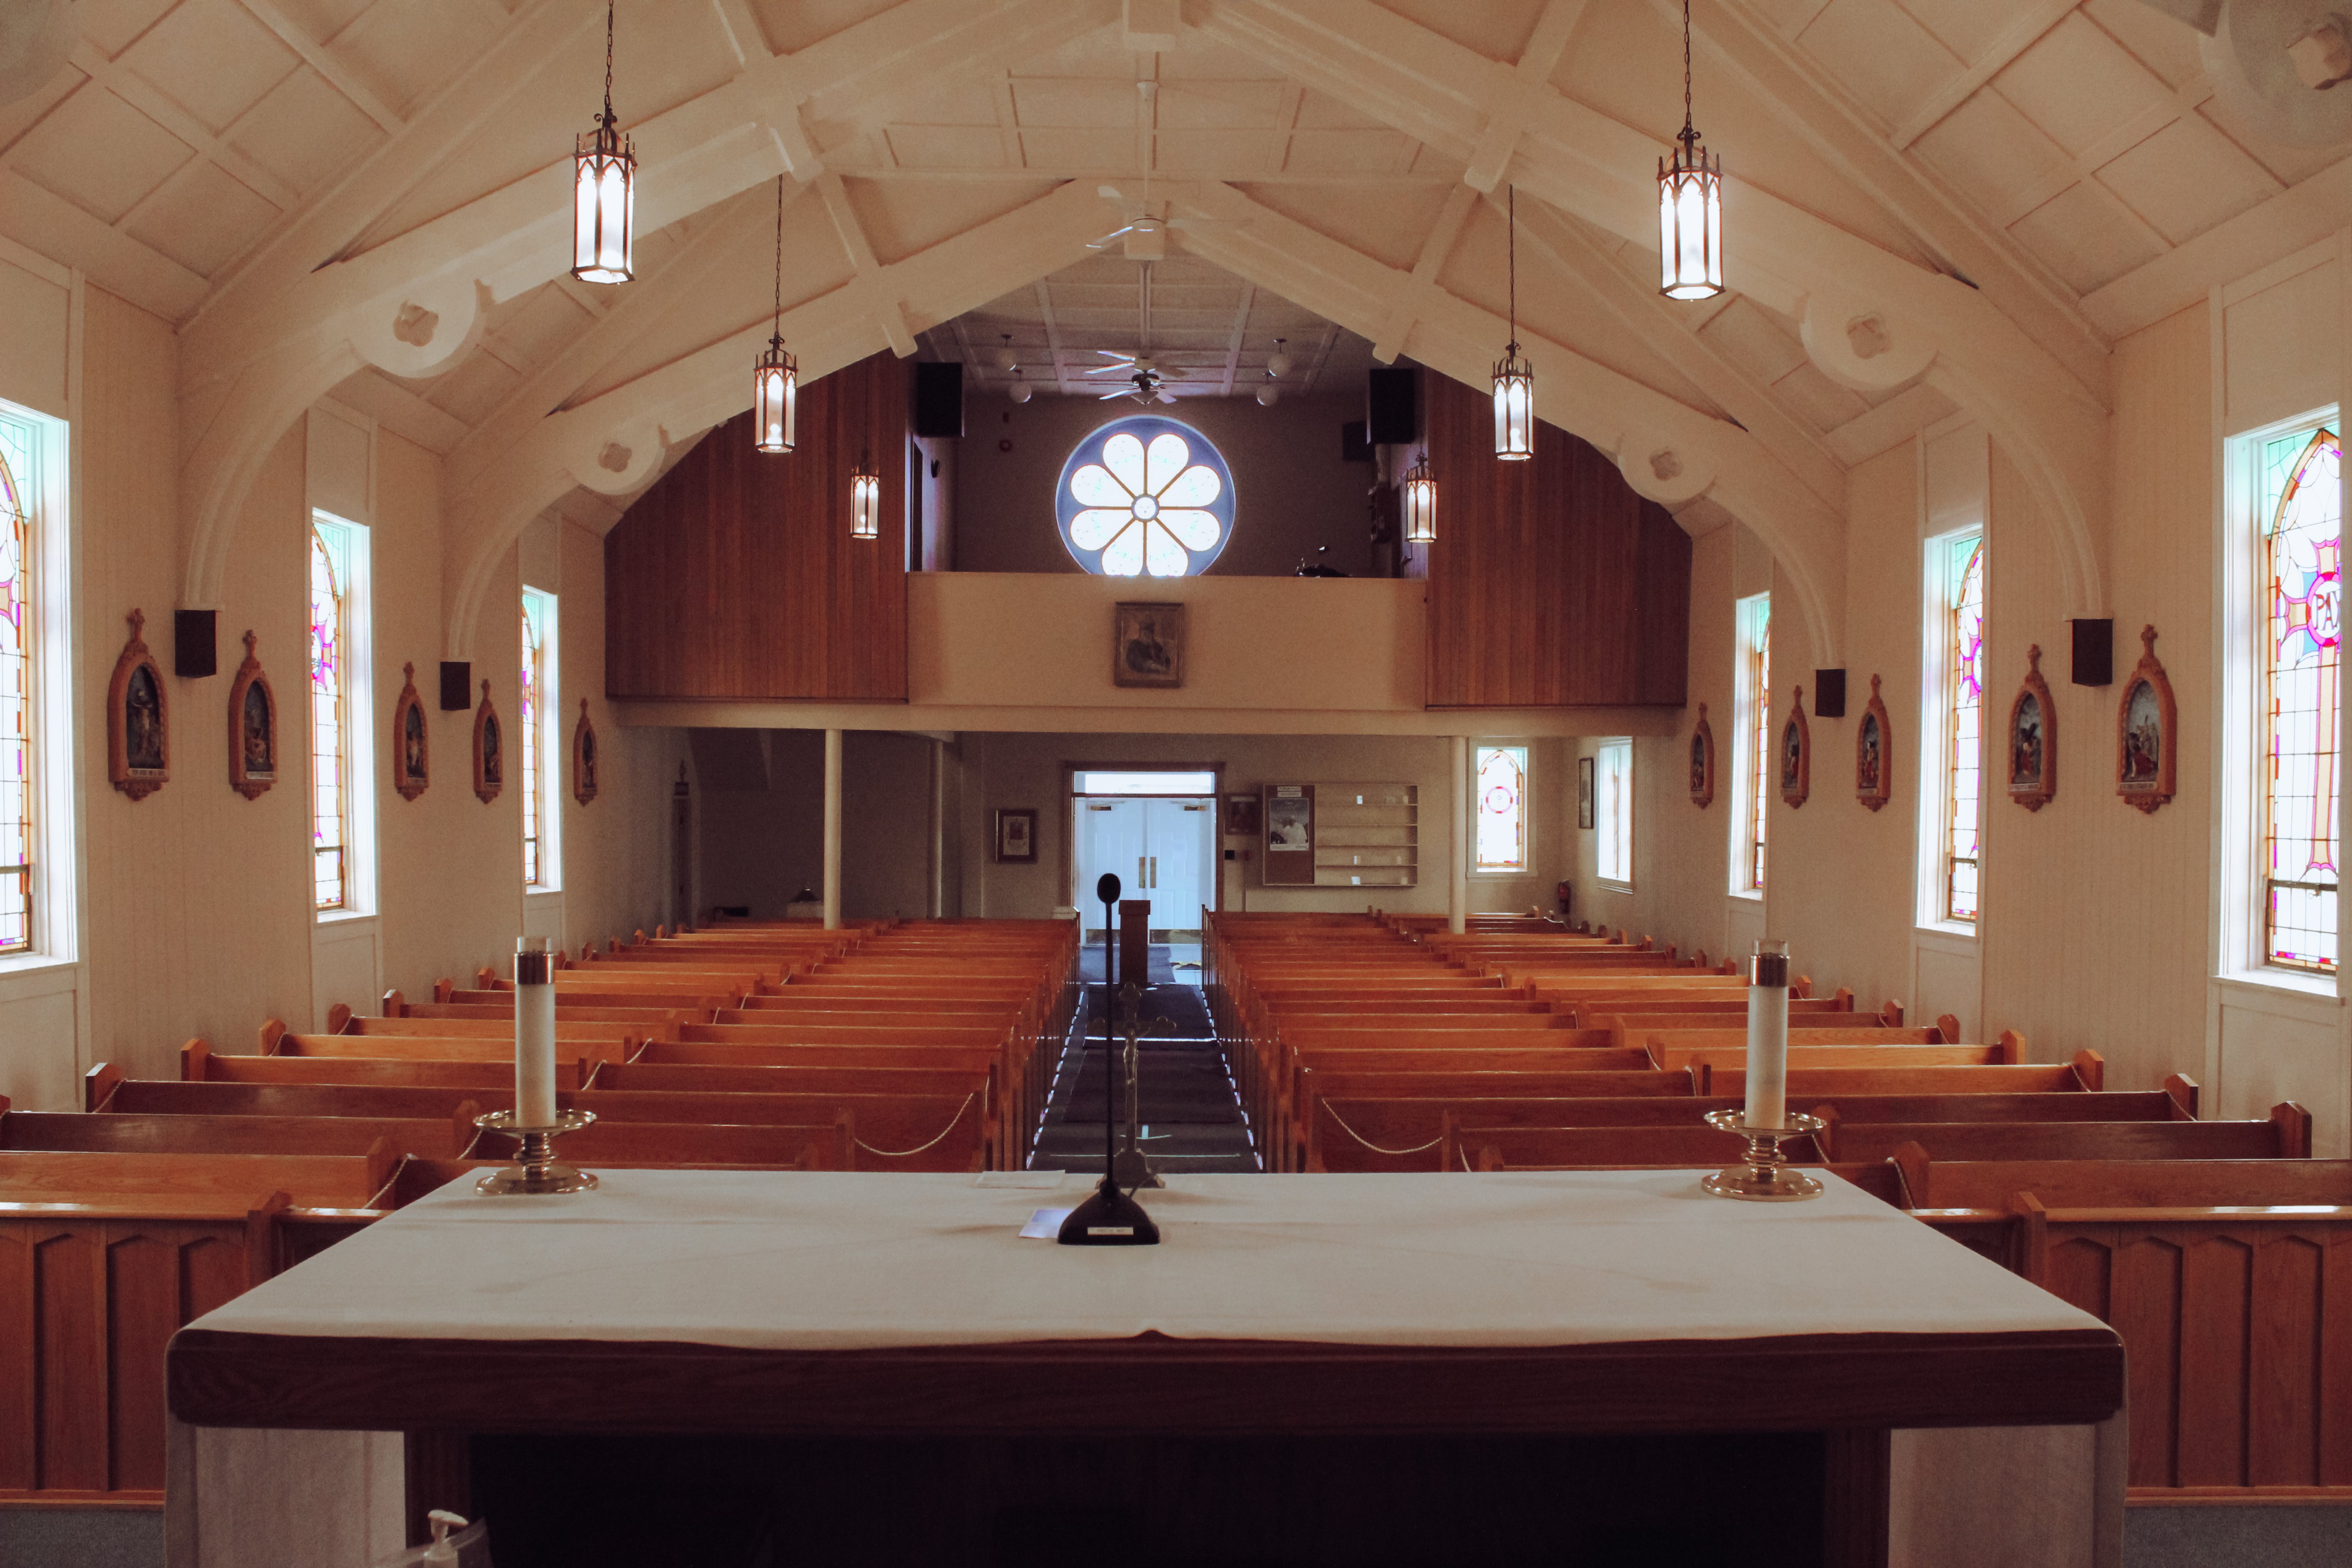 The view of the church from behind the altar.